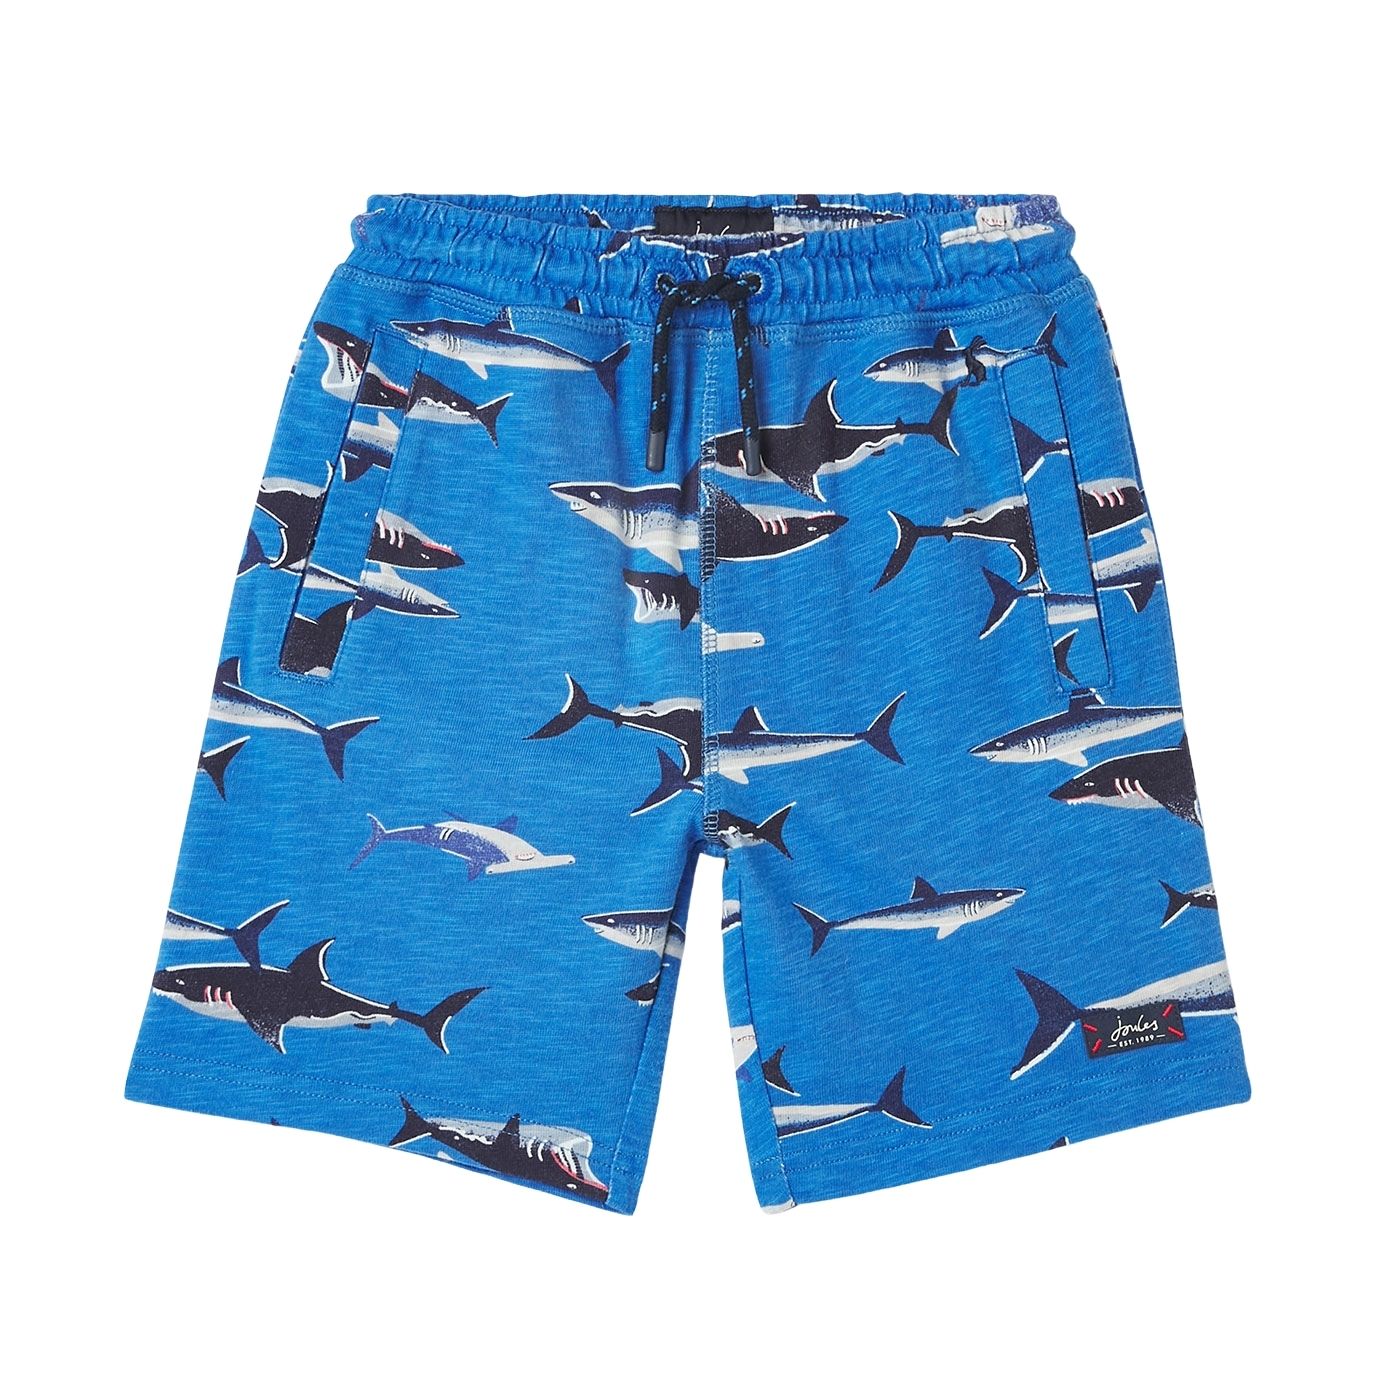 Joules Jed Jersey Printed Jog Shorts - Blue Sharks